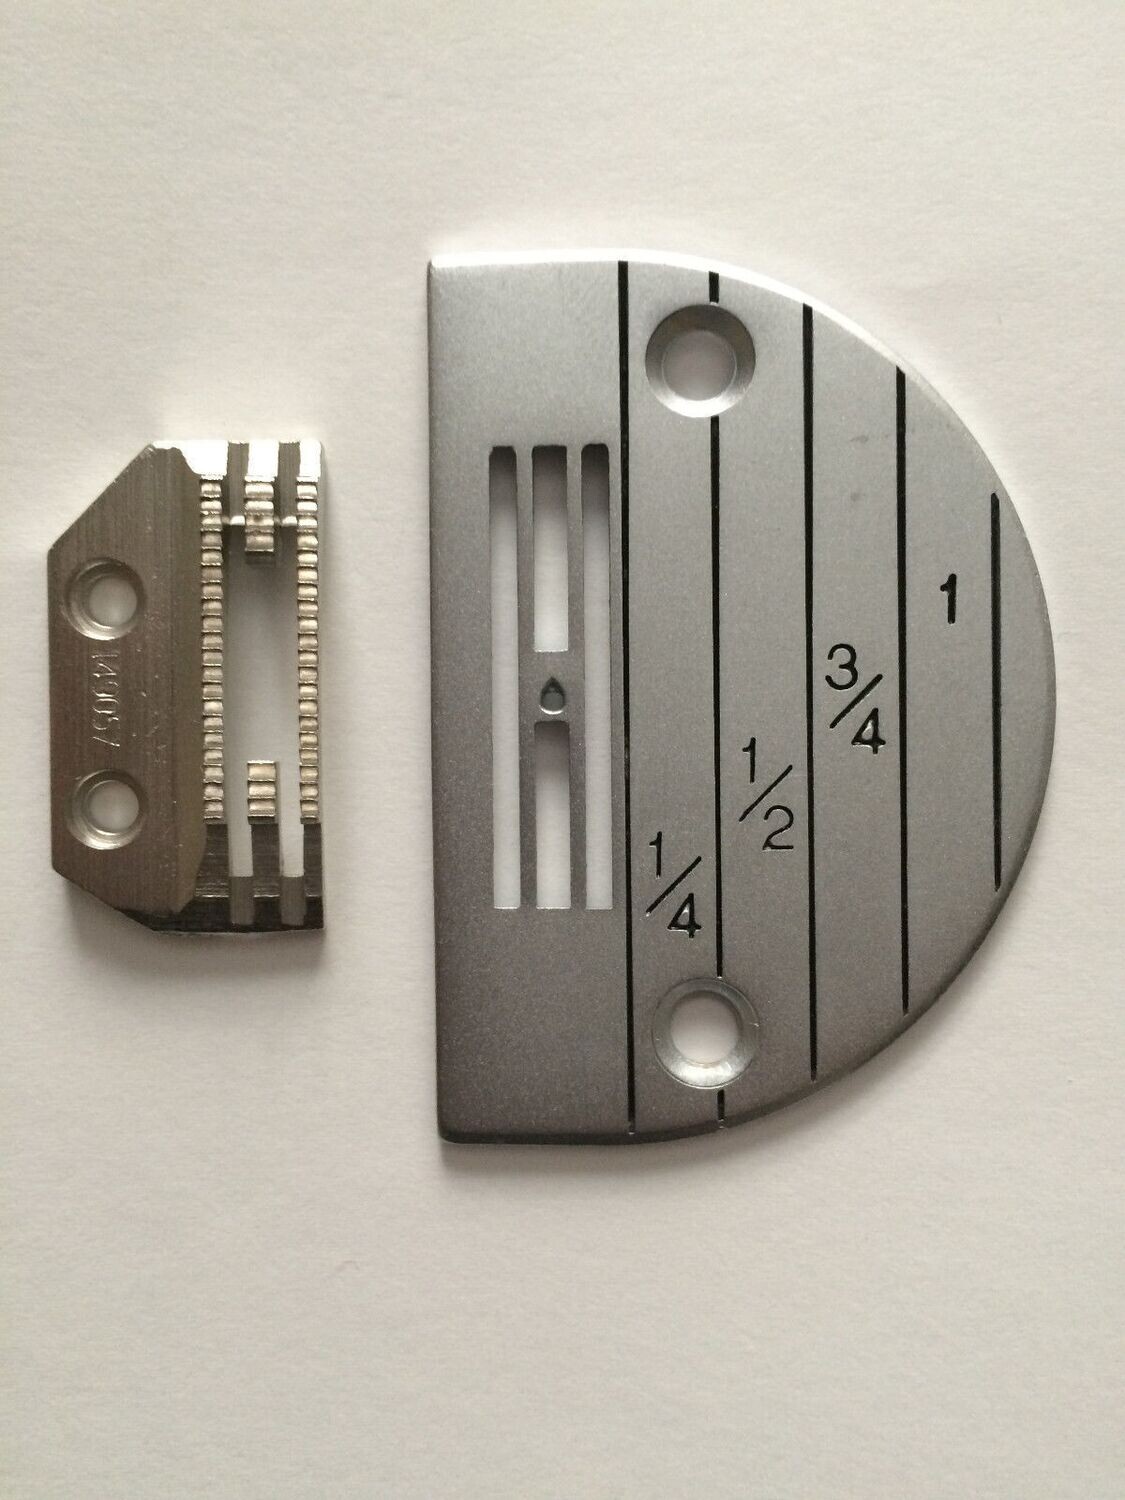 Standard Needle Plate & Feed Dog for most industrial straight stitch sewing machines.